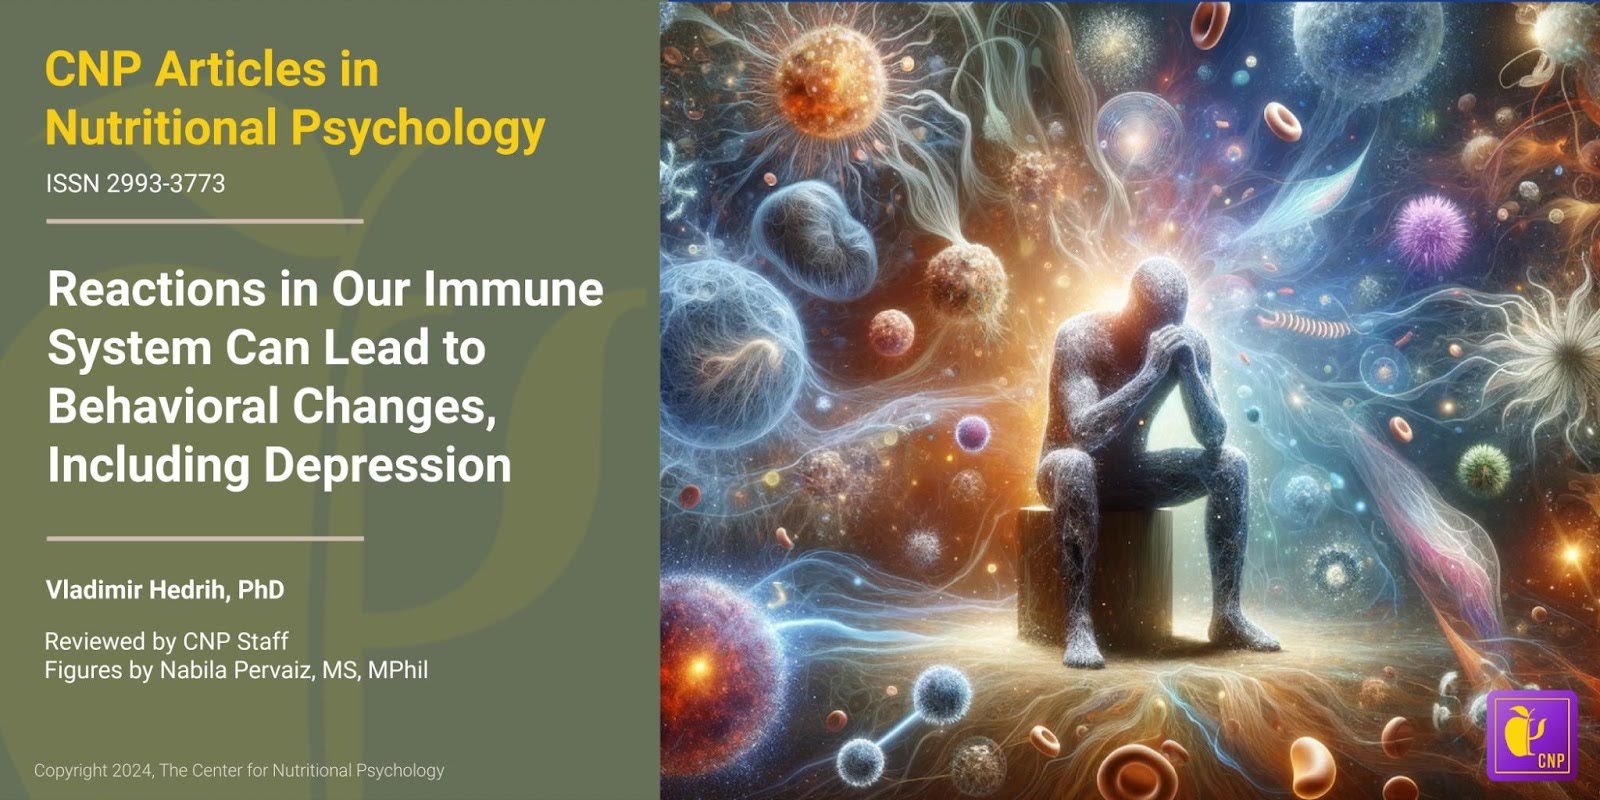 Reactions in Our Immune System Can Lead to Behavioral Changes, Including Depression